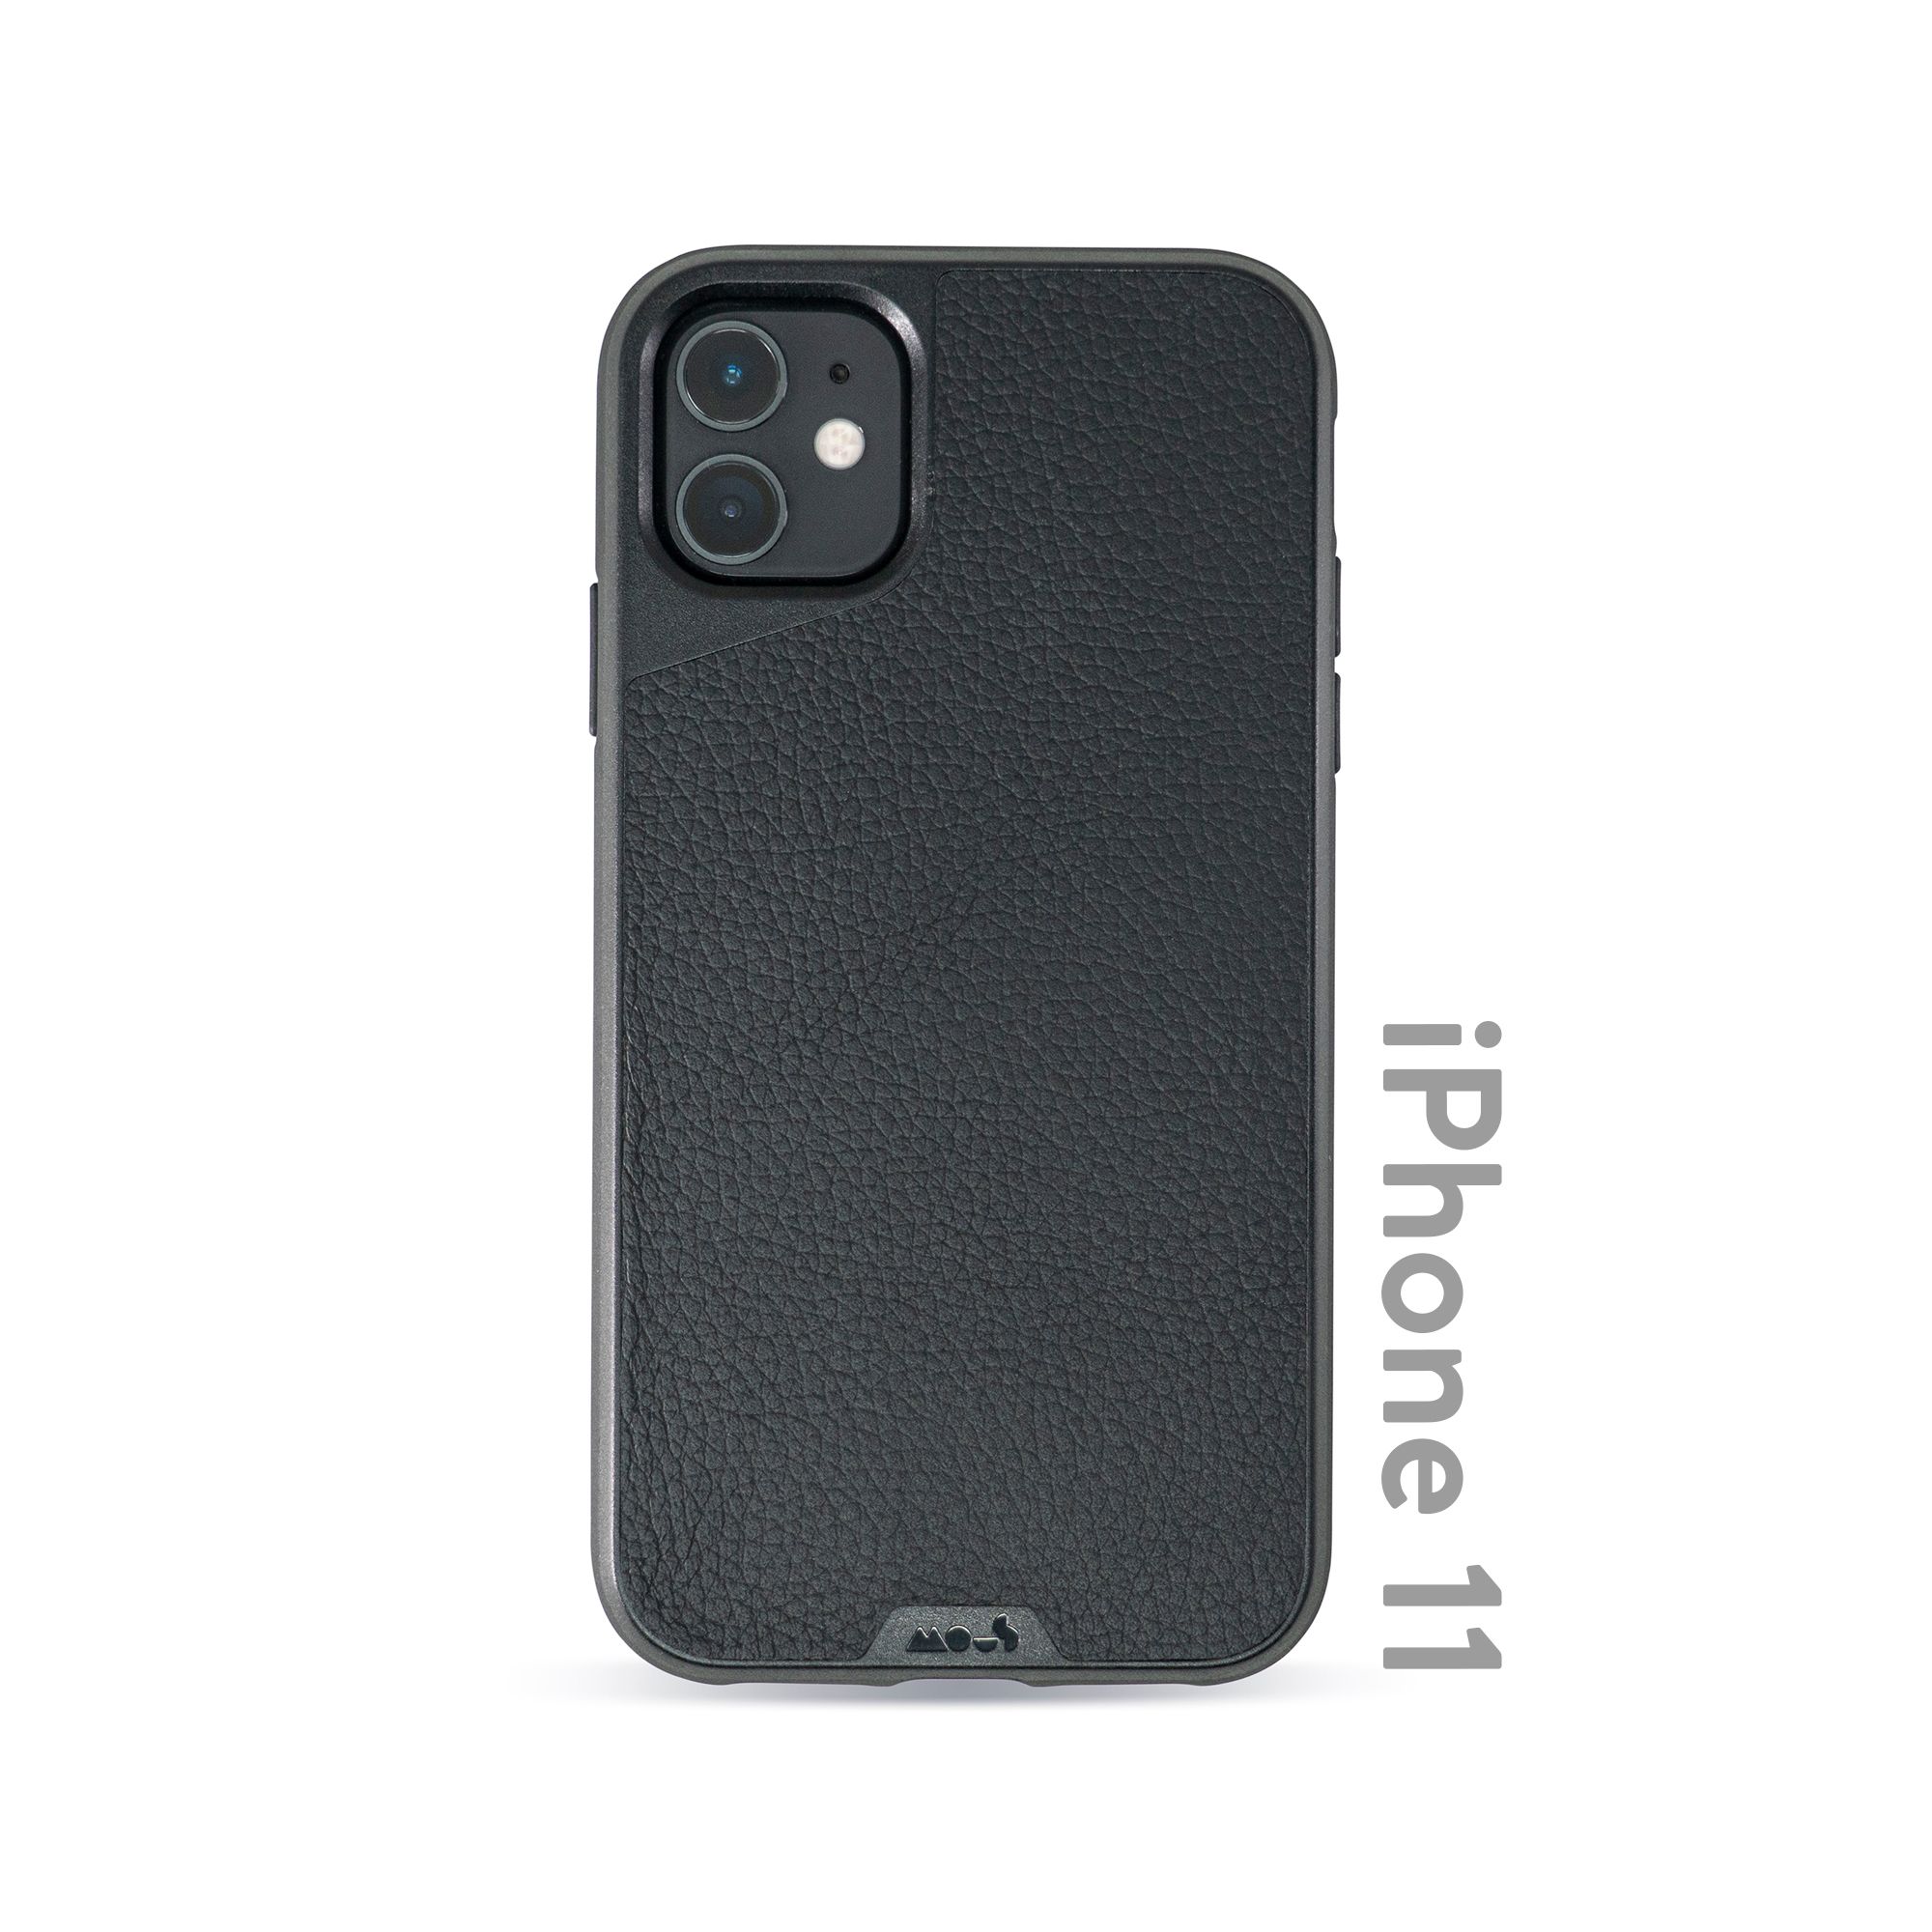 Mous - Protective Case for iPhone 11 - Limitless 3.0 - Black Leather ...